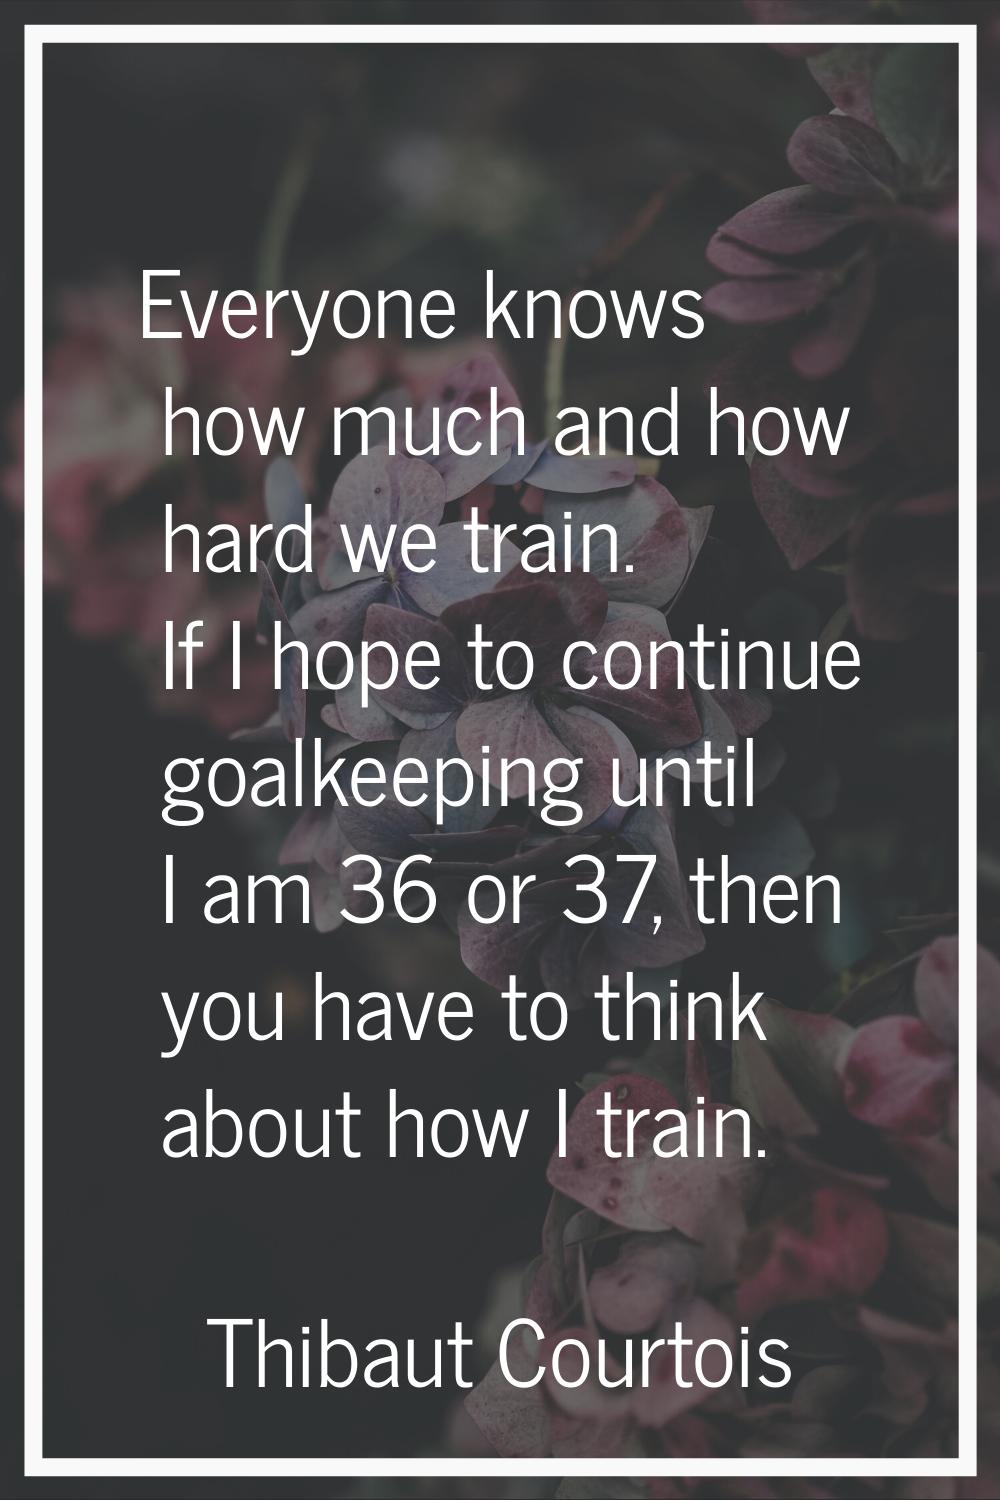 Everyone knows how much and how hard we train. If I hope to continue goalkeeping until I am 36 or 3